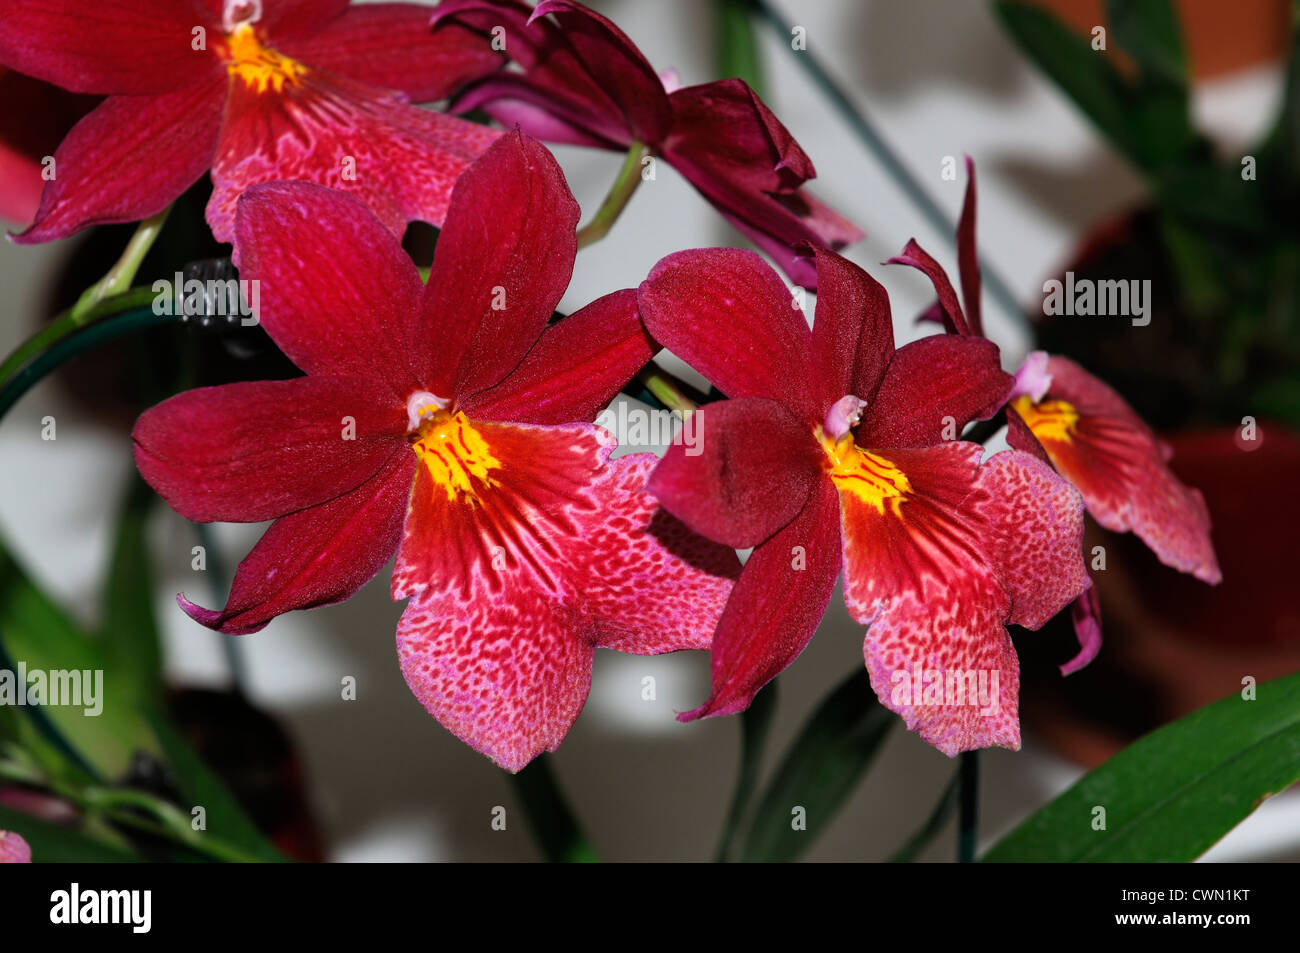 burrageara nelly isler exotic orchids closeup pink red markings speckled flowers petals plant portraits selective focus Stock Photo